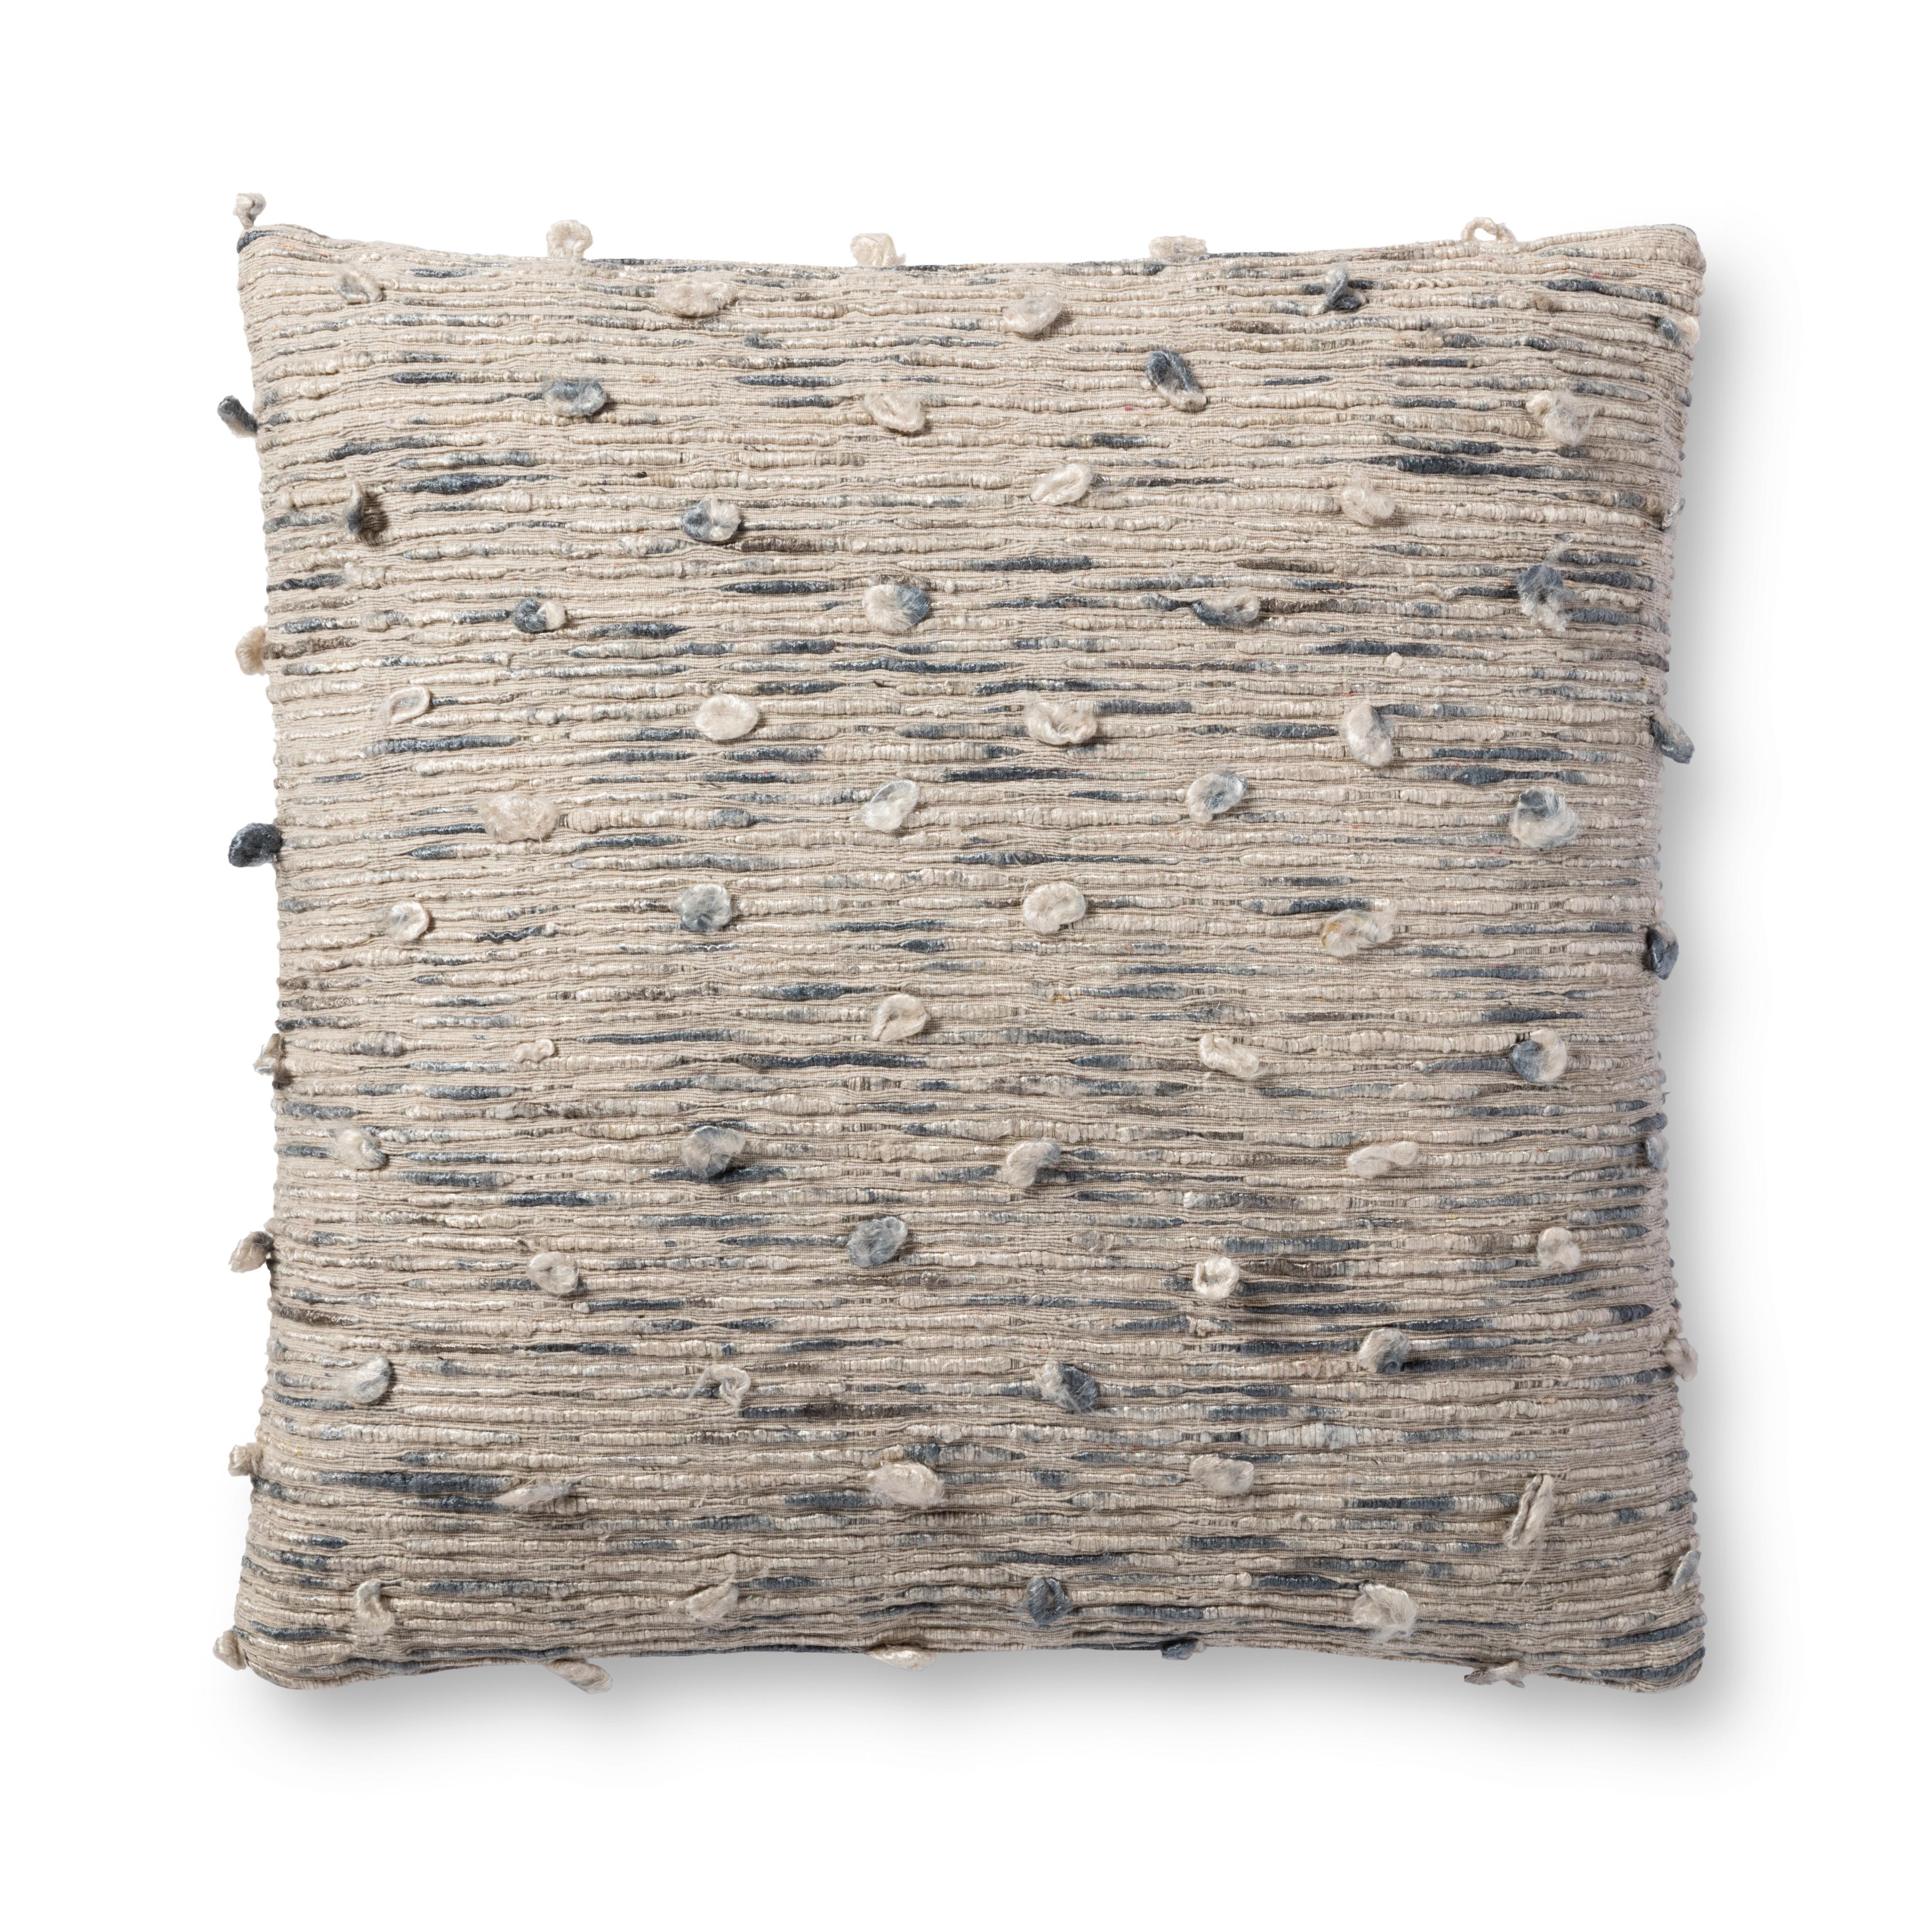 PILLOWS P4134 GREY / BLUE 22" x 22" Cover Only - Image 0